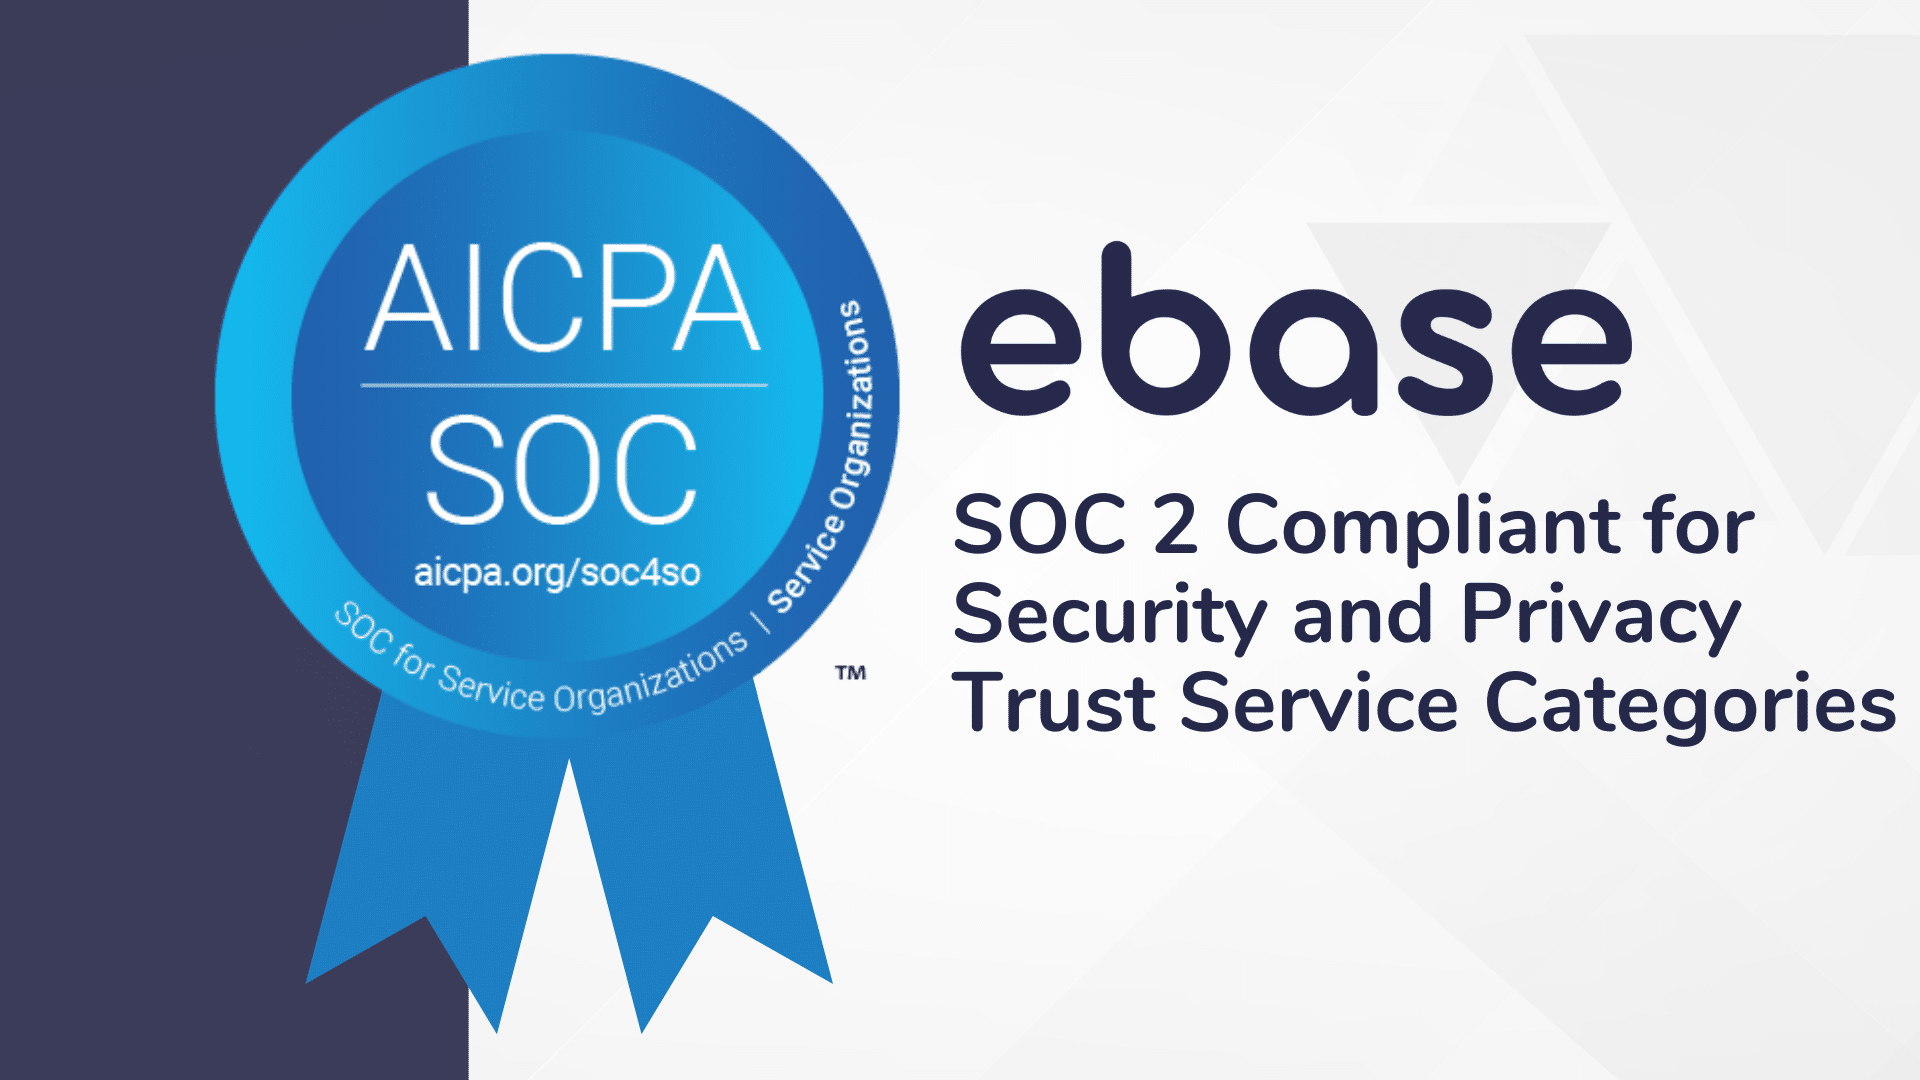 A blue ribbon with the words acpa sse 2 complaint for security and privacy trust service categories. ebase achieves SOC 2 Compliance for Security and Privacy Trust Services.